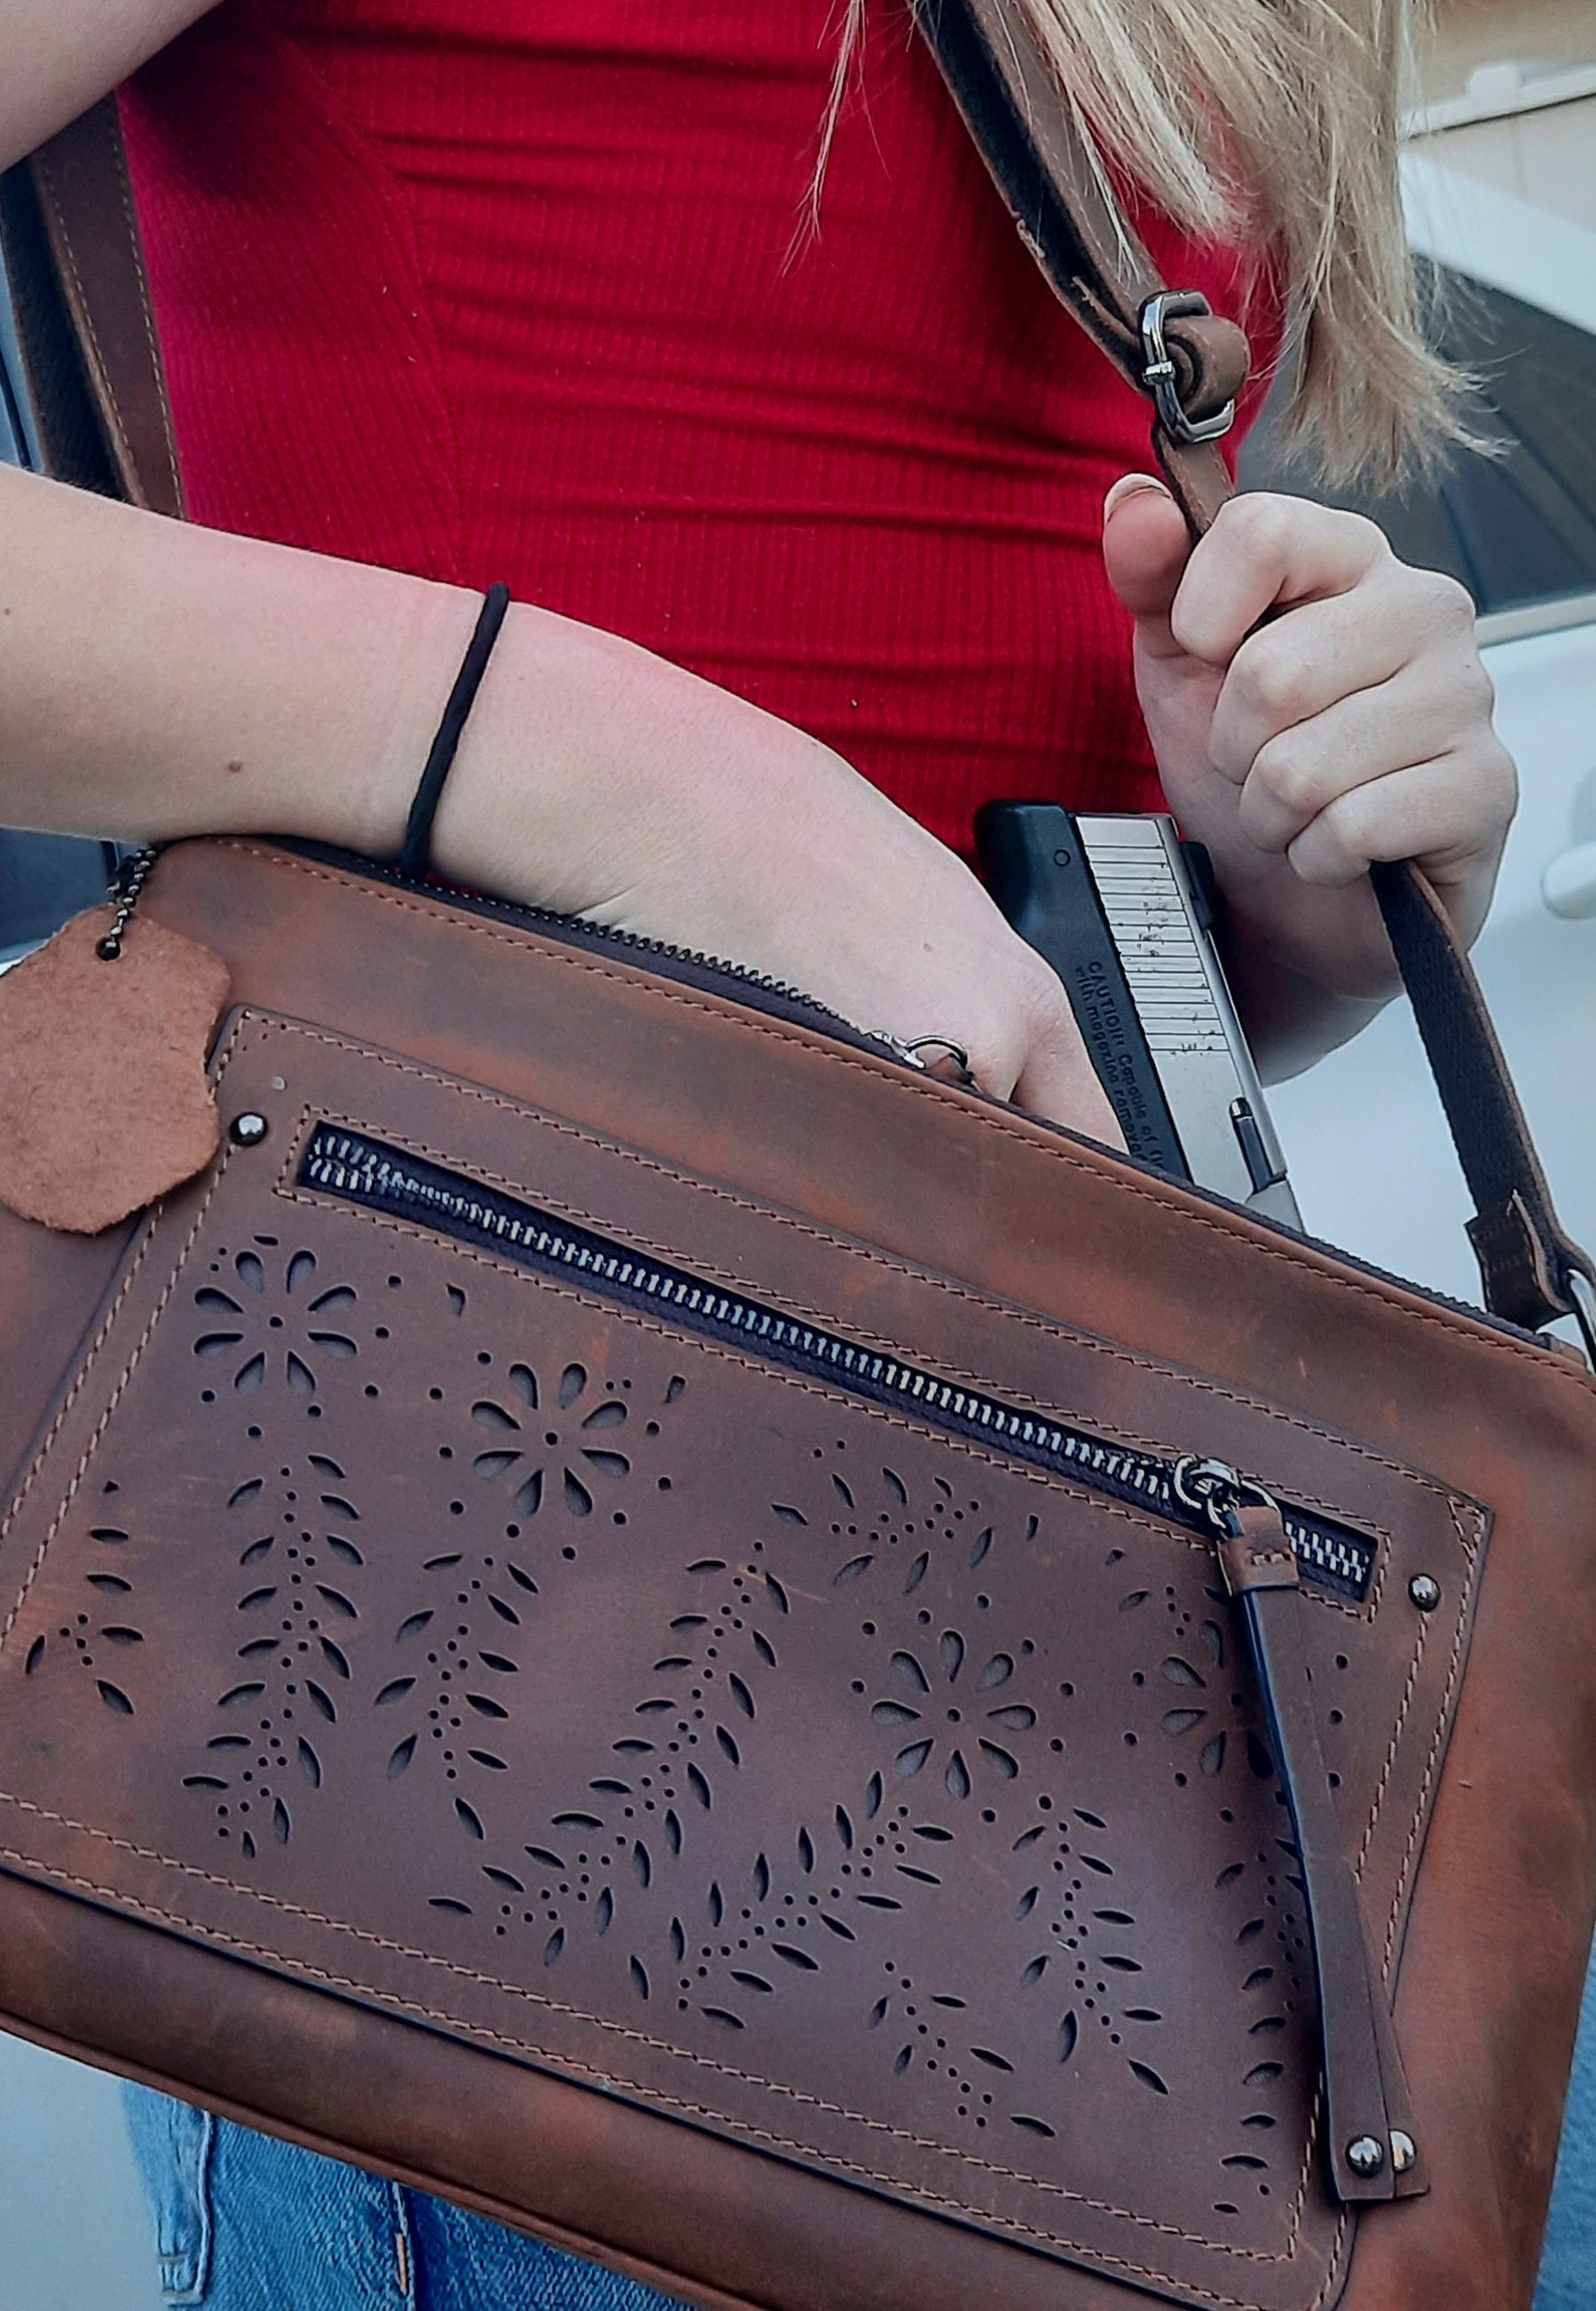 Gun compartment on leather conceal carry purse being demonstrated